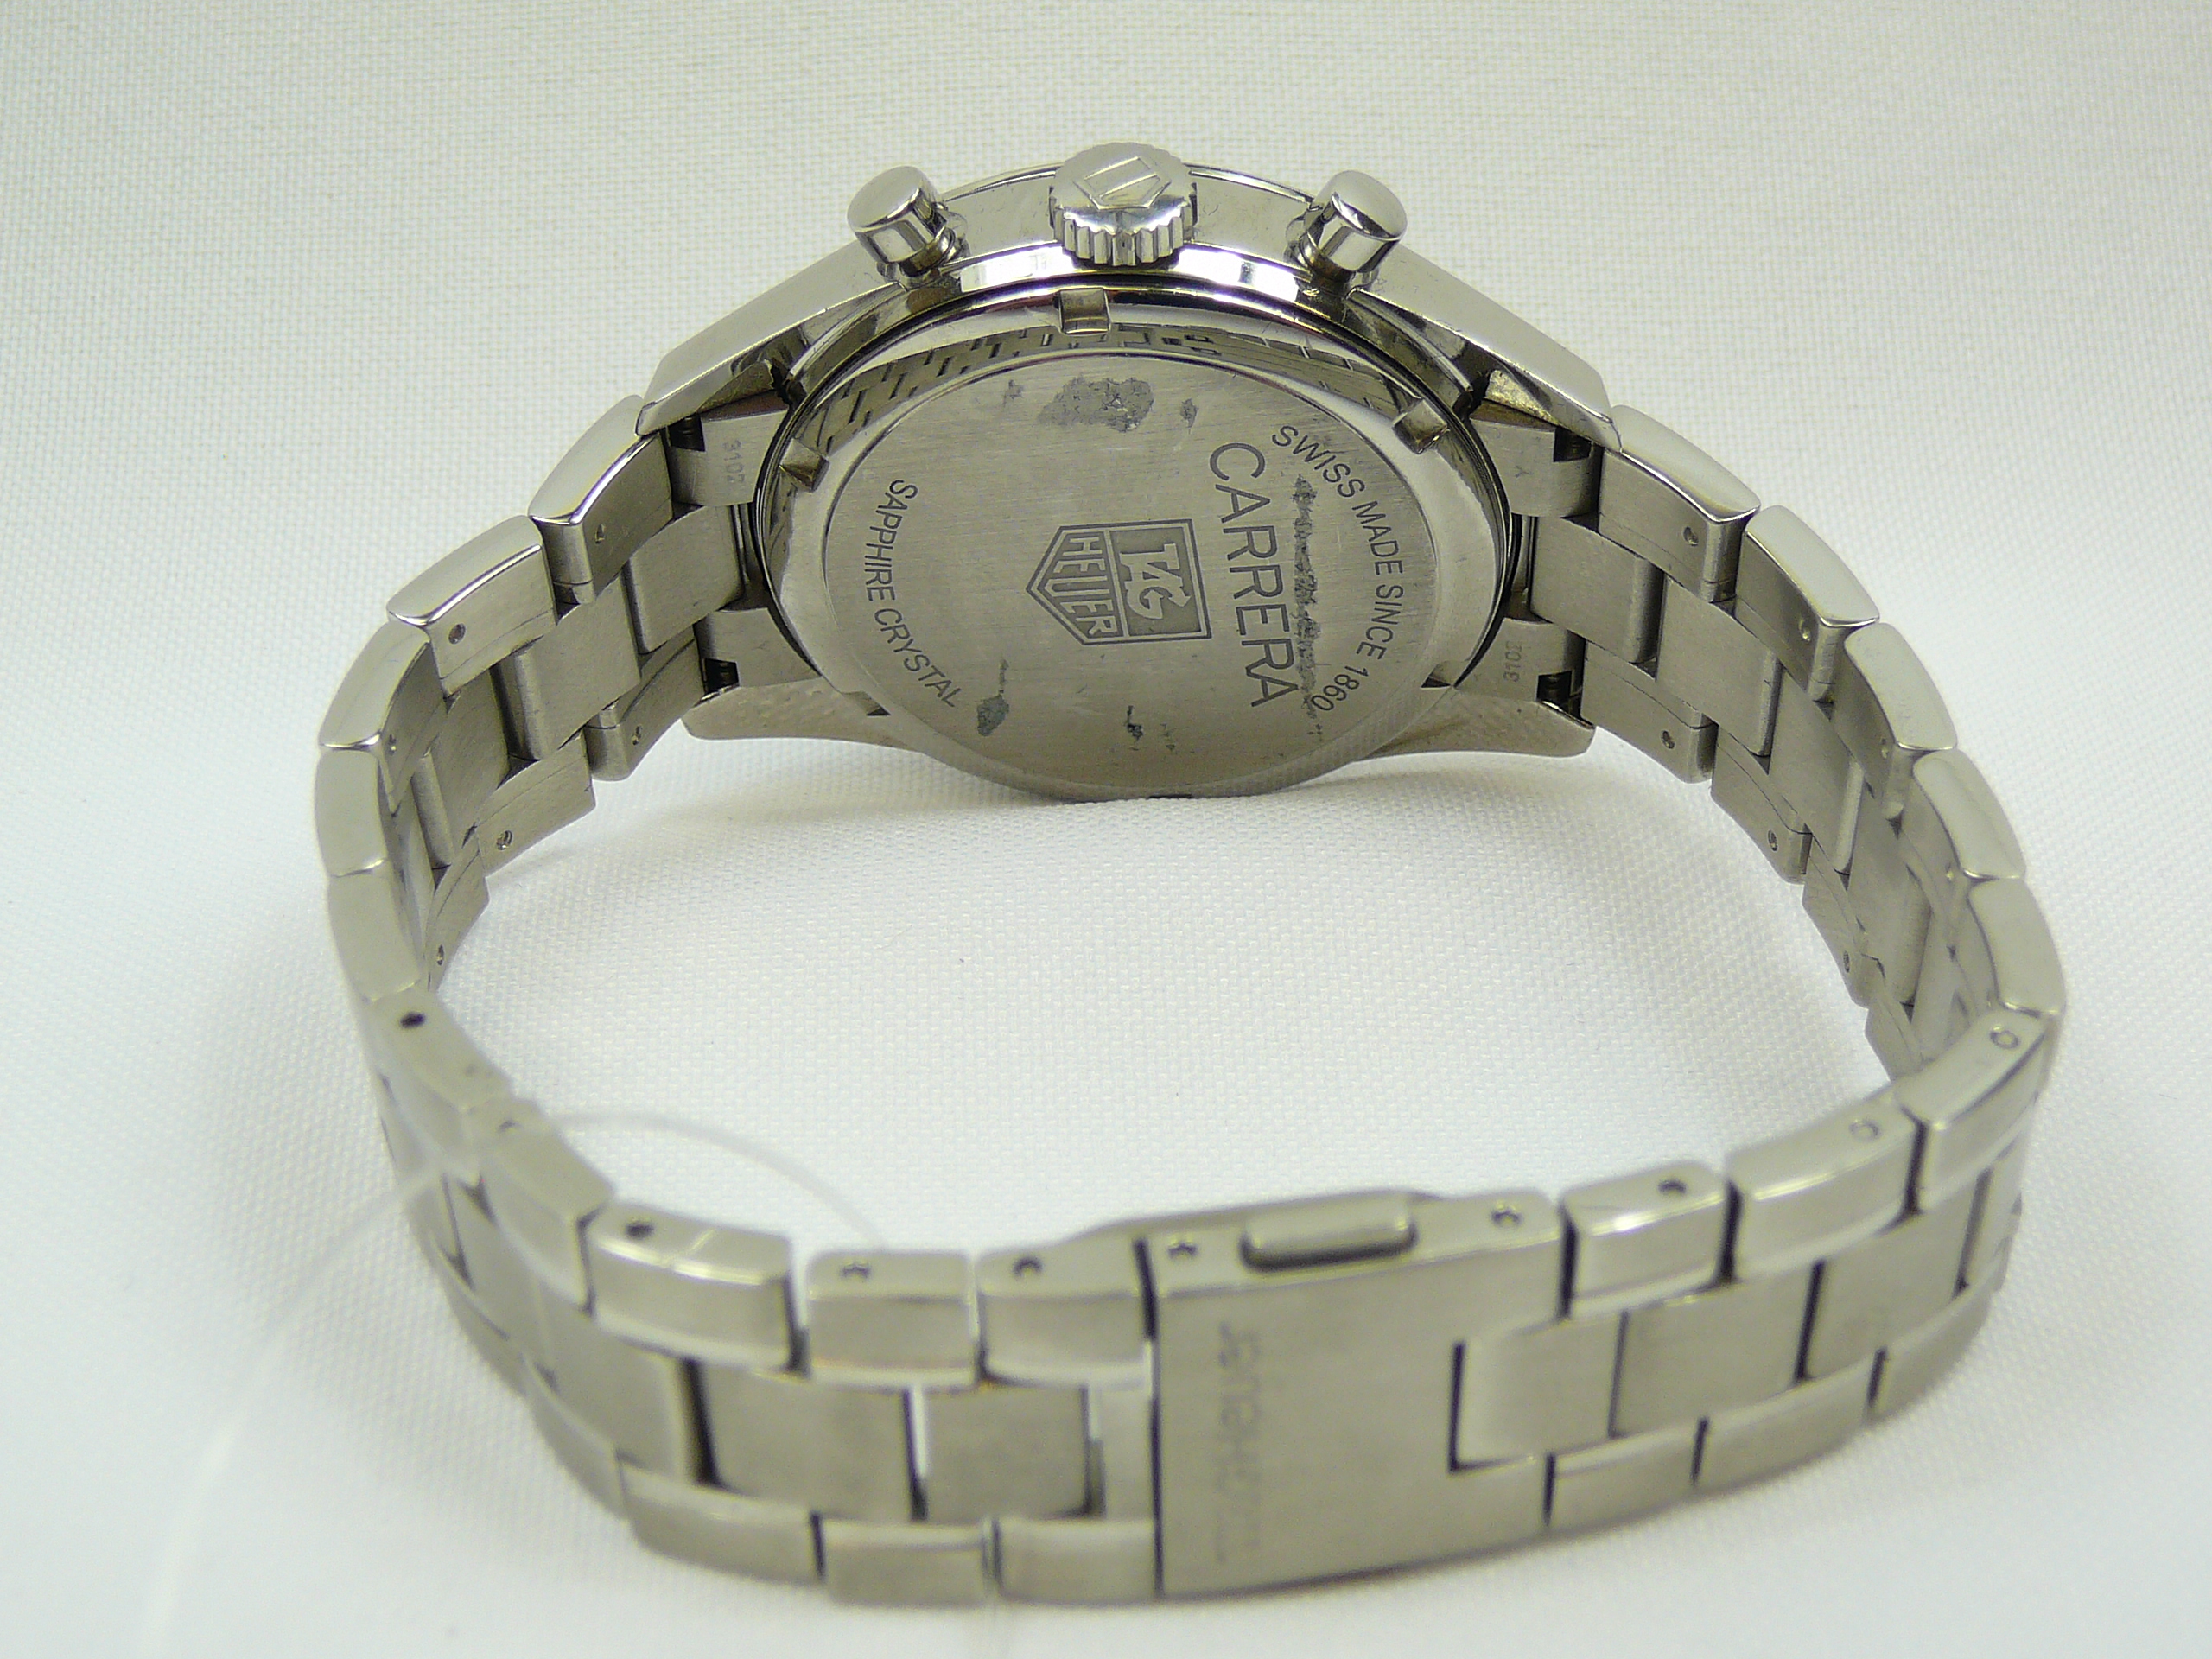 Gents Tag Heuer Wrist Watch - Image 5 of 5